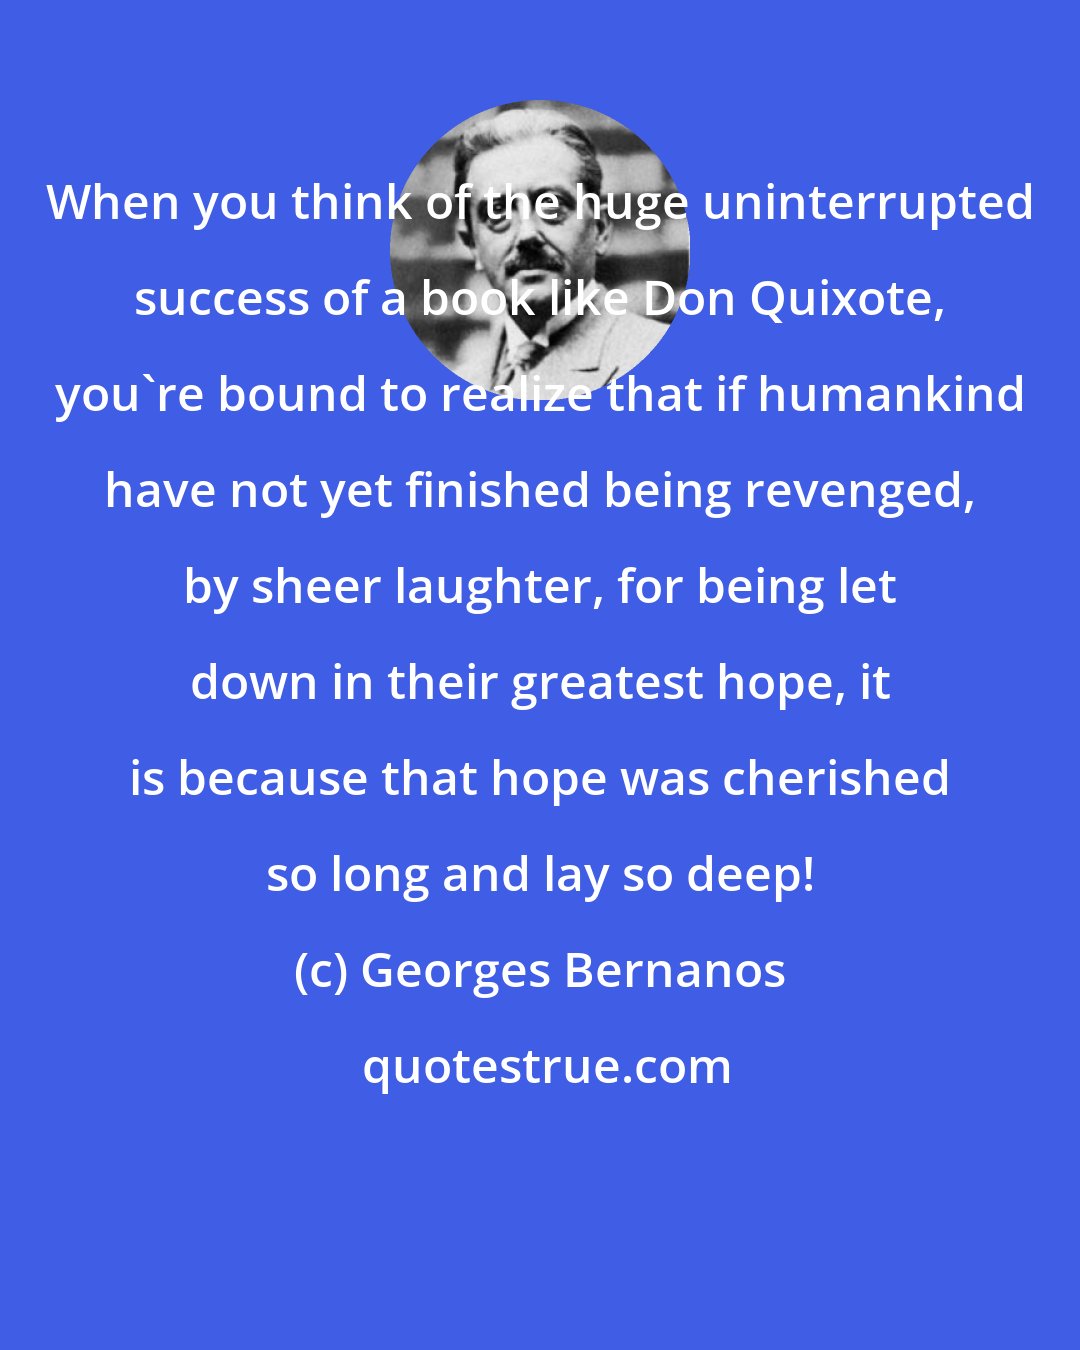 Georges Bernanos: When you think of the huge uninterrupted success of a book like Don Quixote, you're bound to realize that if humankind have not yet finished being revenged, by sheer laughter, for being let down in their greatest hope, it is because that hope was cherished so long and lay so deep!